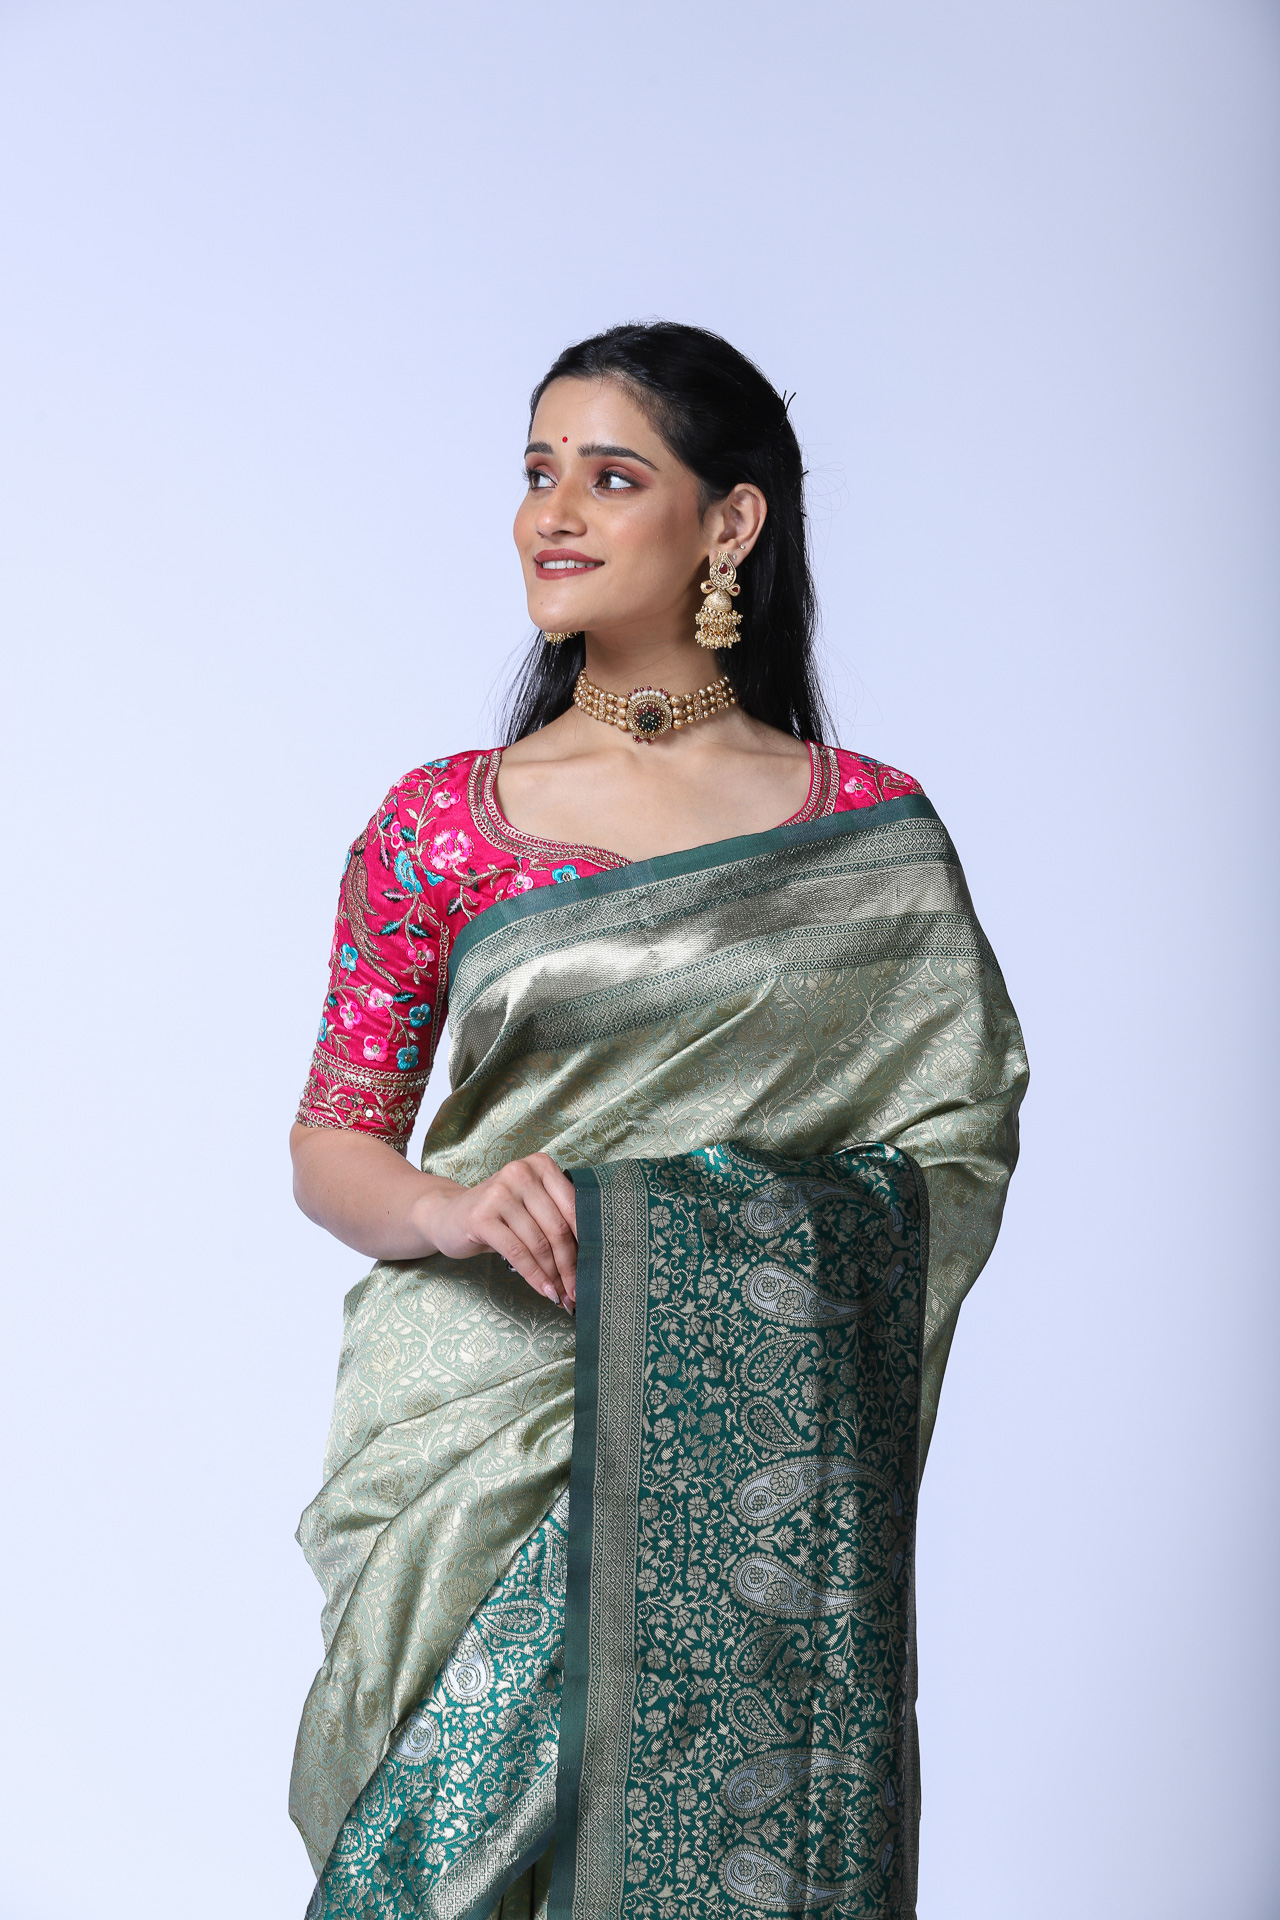 Buy New Design Sarees Online Shopping For Women – Paaprika